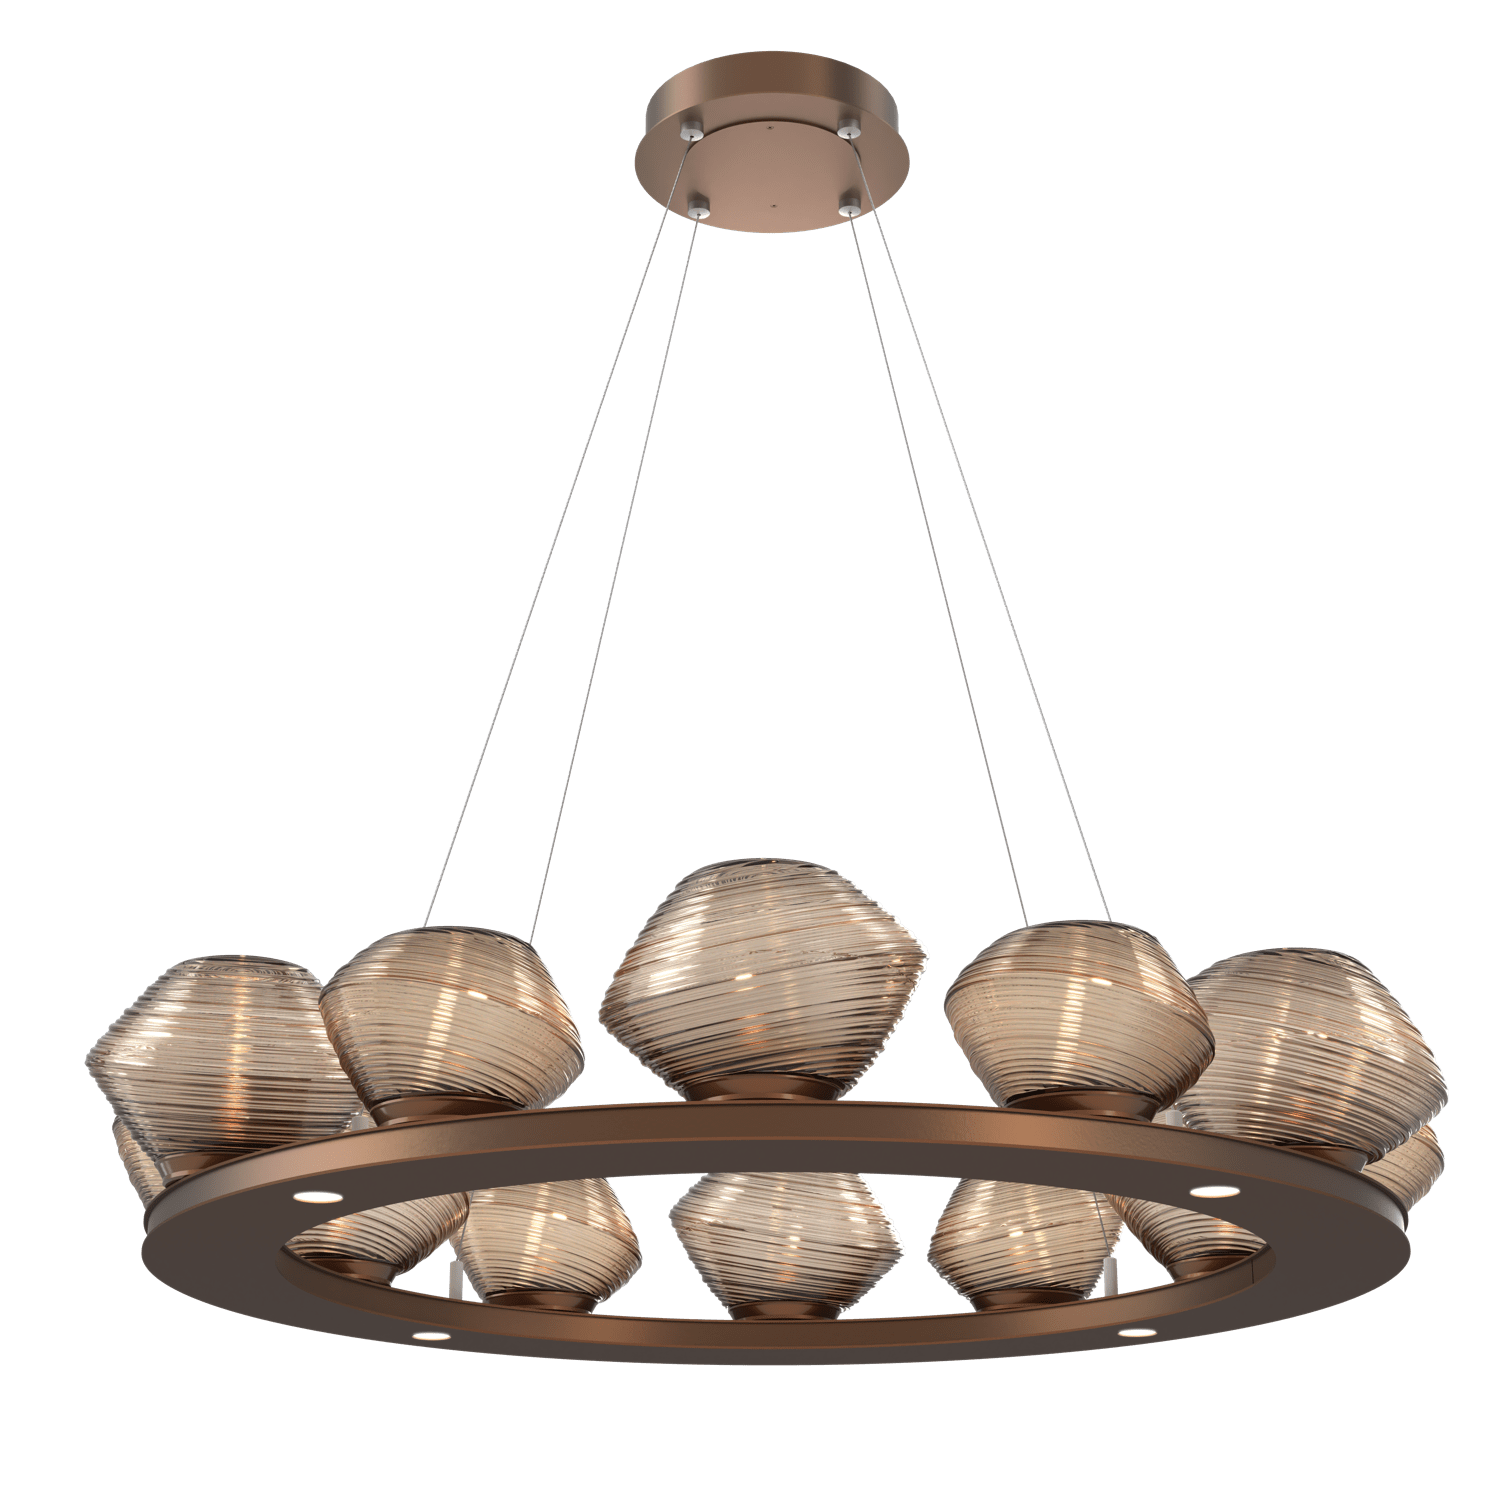 CHB0089-0C-BB-B-Hammerton-Studio-Mesa-36-inch-ring-chandelier-with-burnished-bronze-finish-and-bronze-blown-glass-shades-and-LED-lamping